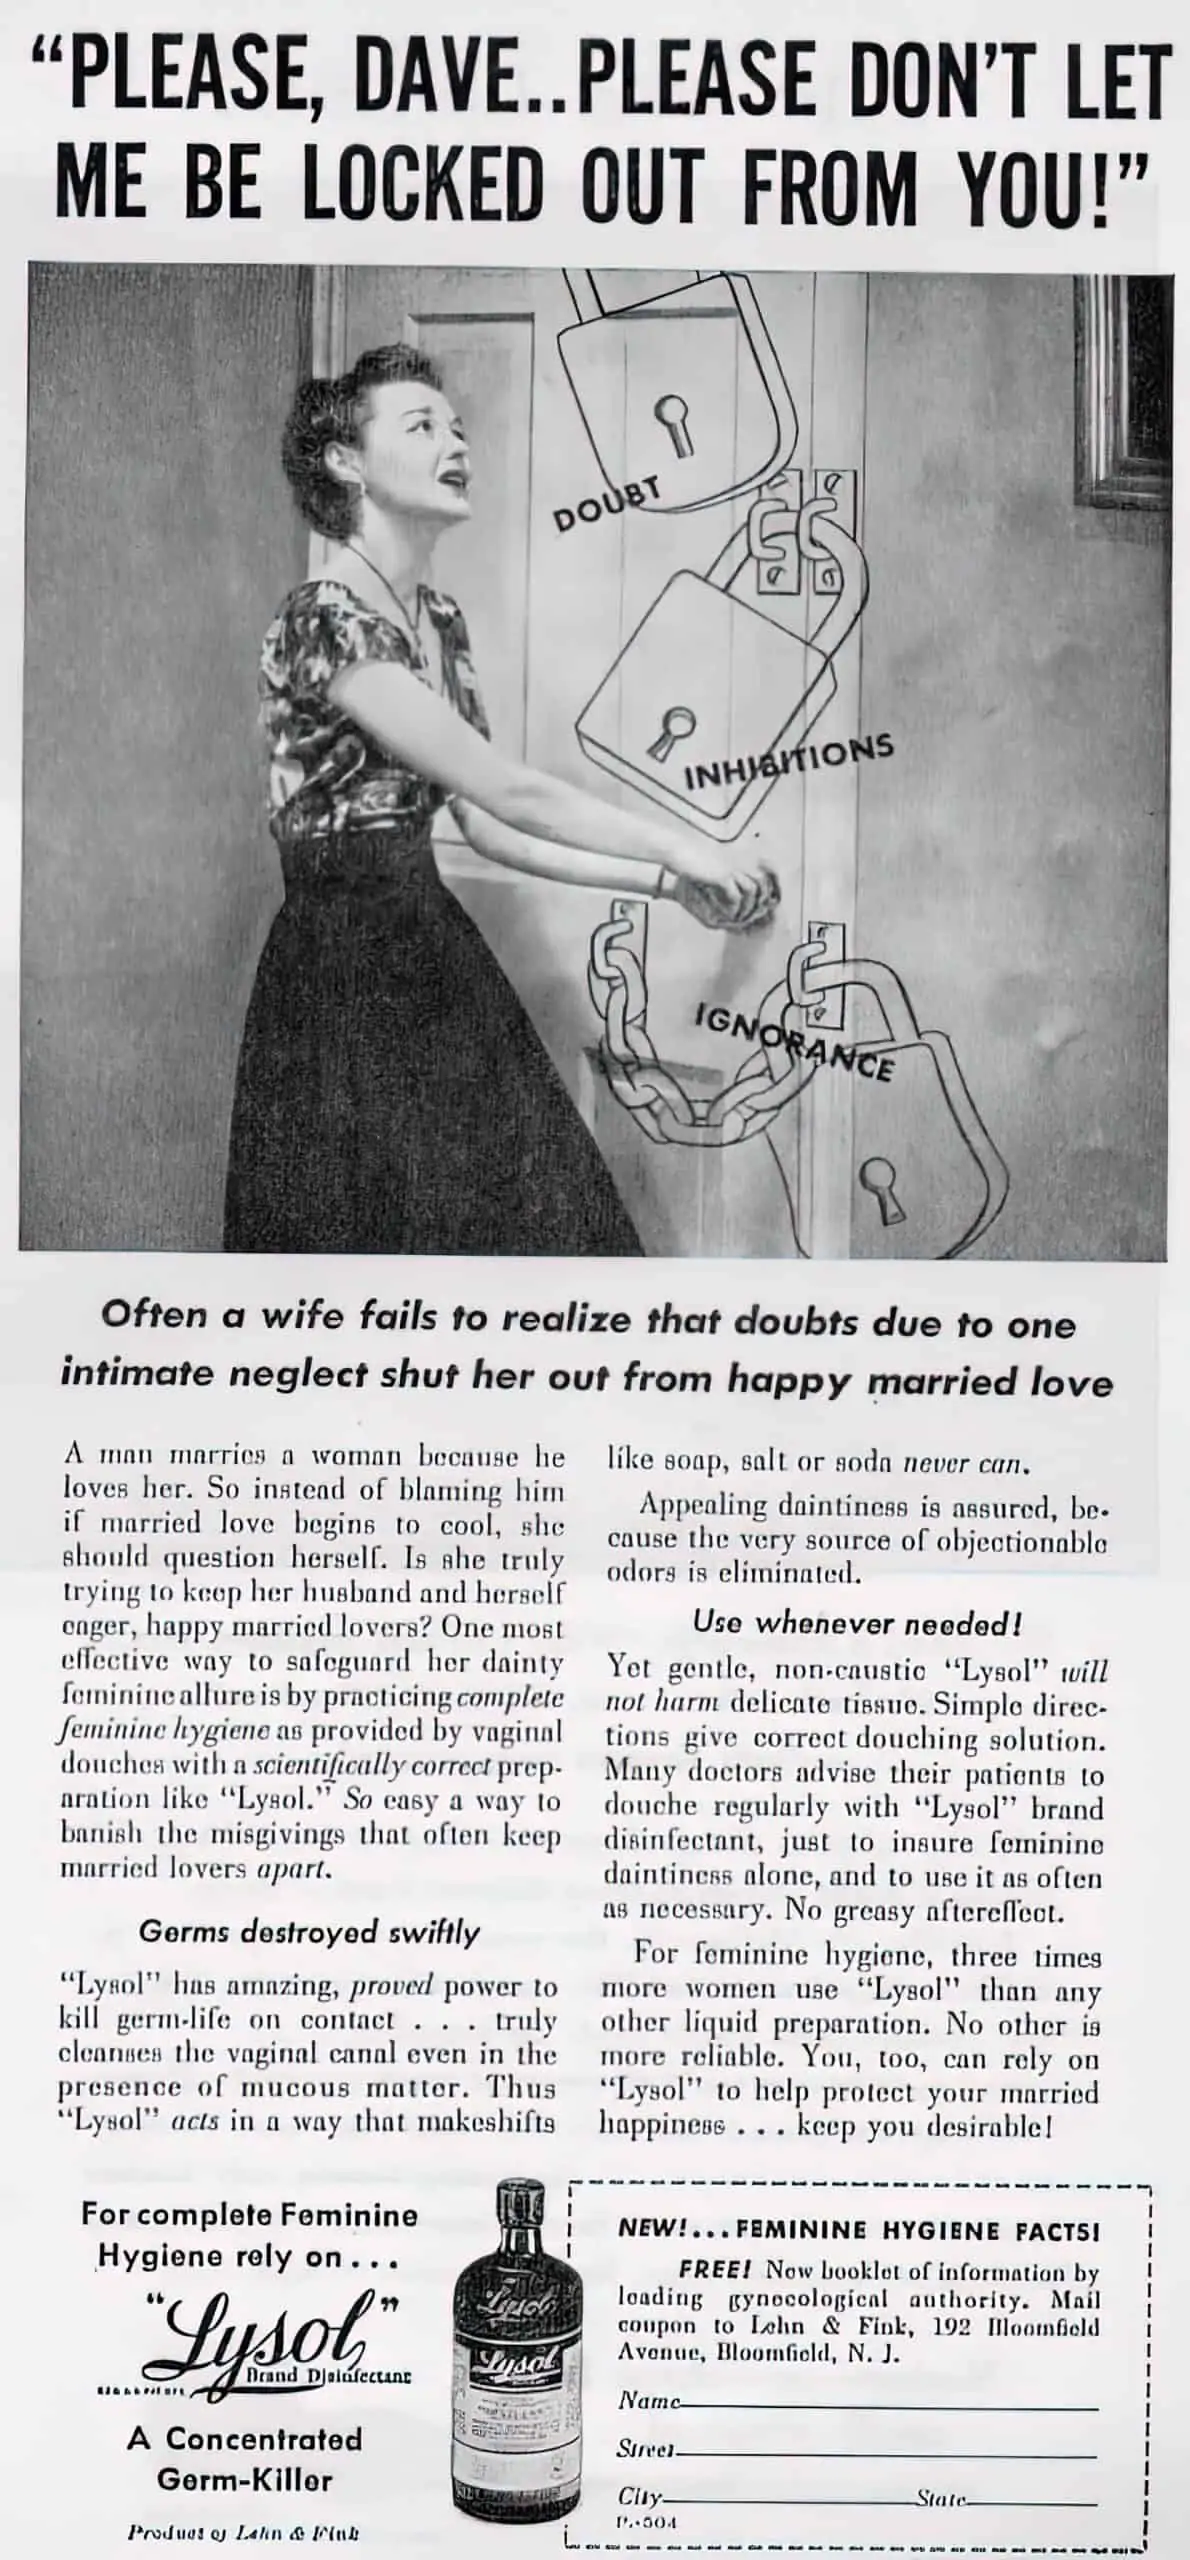 Sexist 50s Advertisment scaled